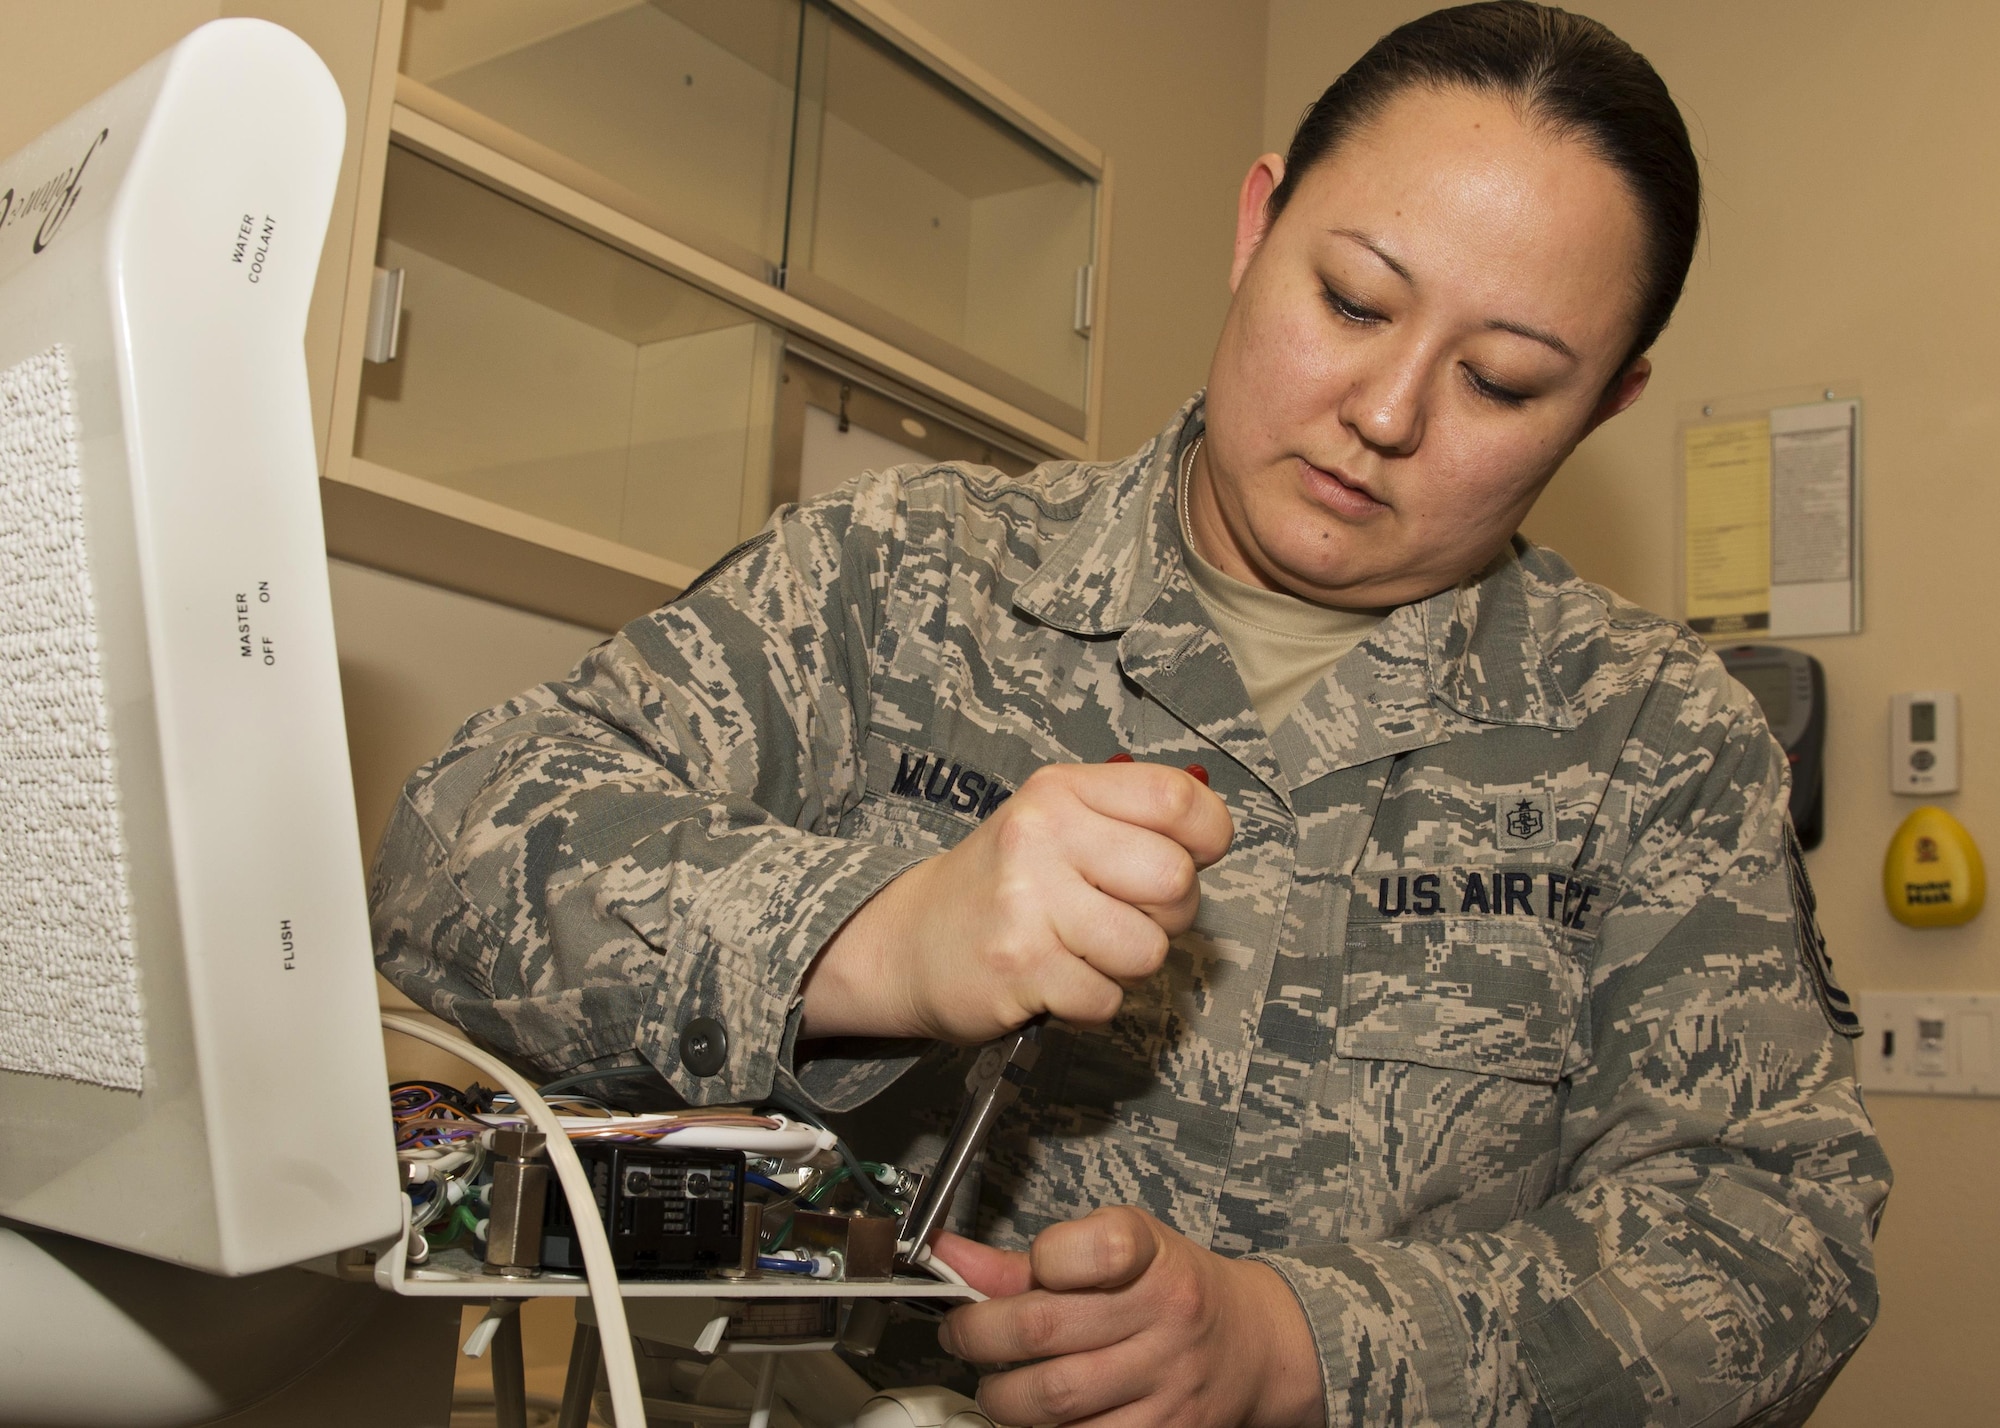 Tech. Sgt. Linsey McCluskey, 5th Medical Support Squadron medical maintenance NCO-in-charge, disconnects a dental hose from the dental chair at the 5th Medical Group clinic at Minot Air Force Base, N.D., Feb. 8, 2017. The hose connects water and air to one device for use with patients. (U.S. Air Force photo/Airman 1st Class Alyssa M. Akers)